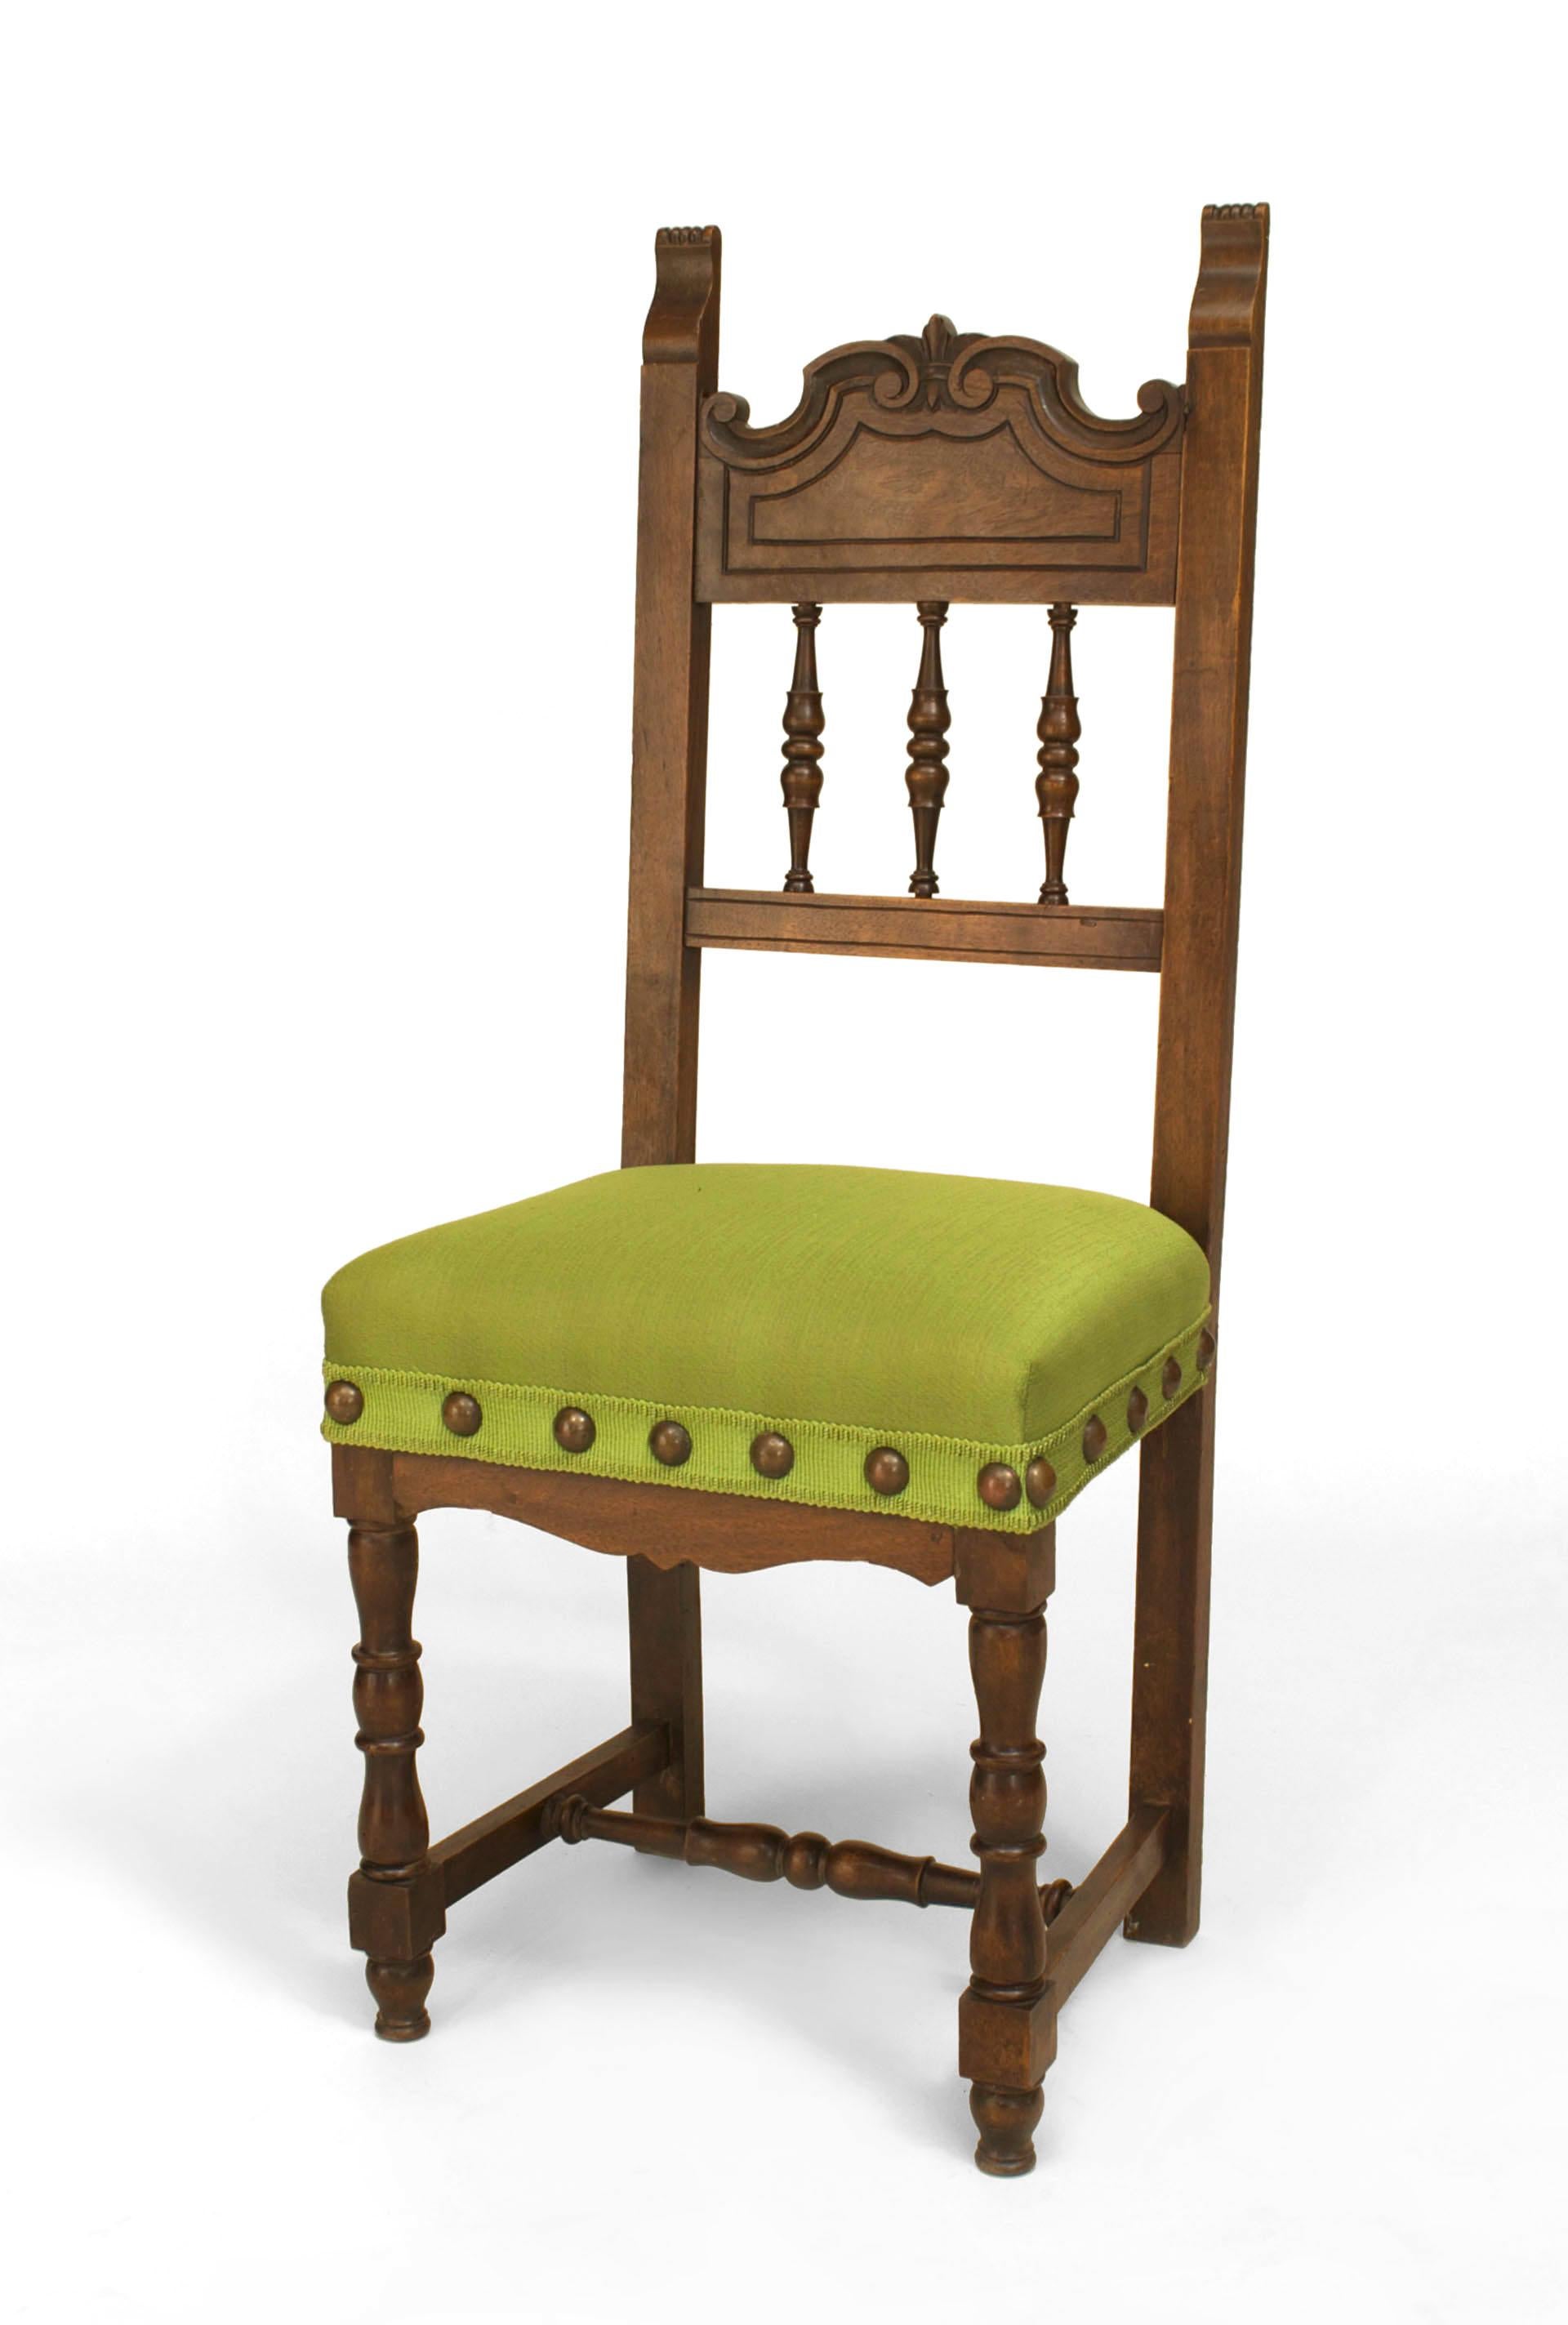 Turn of the century Spanish Renaissance style walnut spindle back side chair with a stretcher and green upholstered seat.